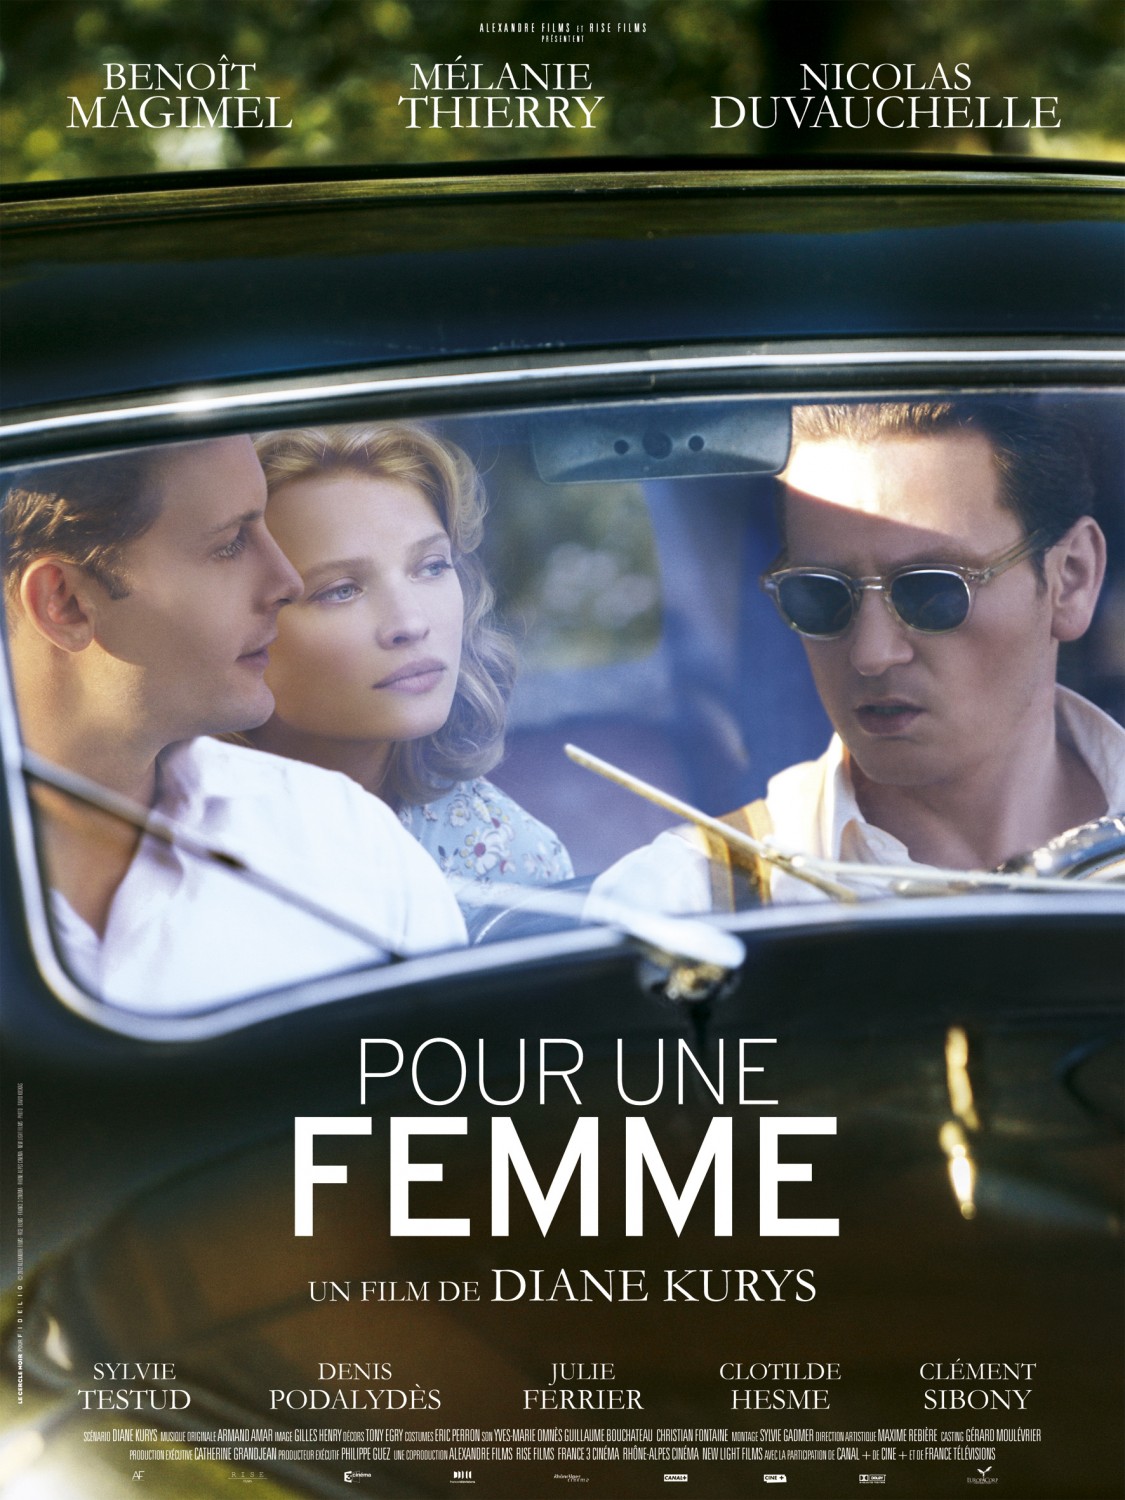 Pour une femme (1 of 2) Extra Large Movie Poster Image IMP Awards